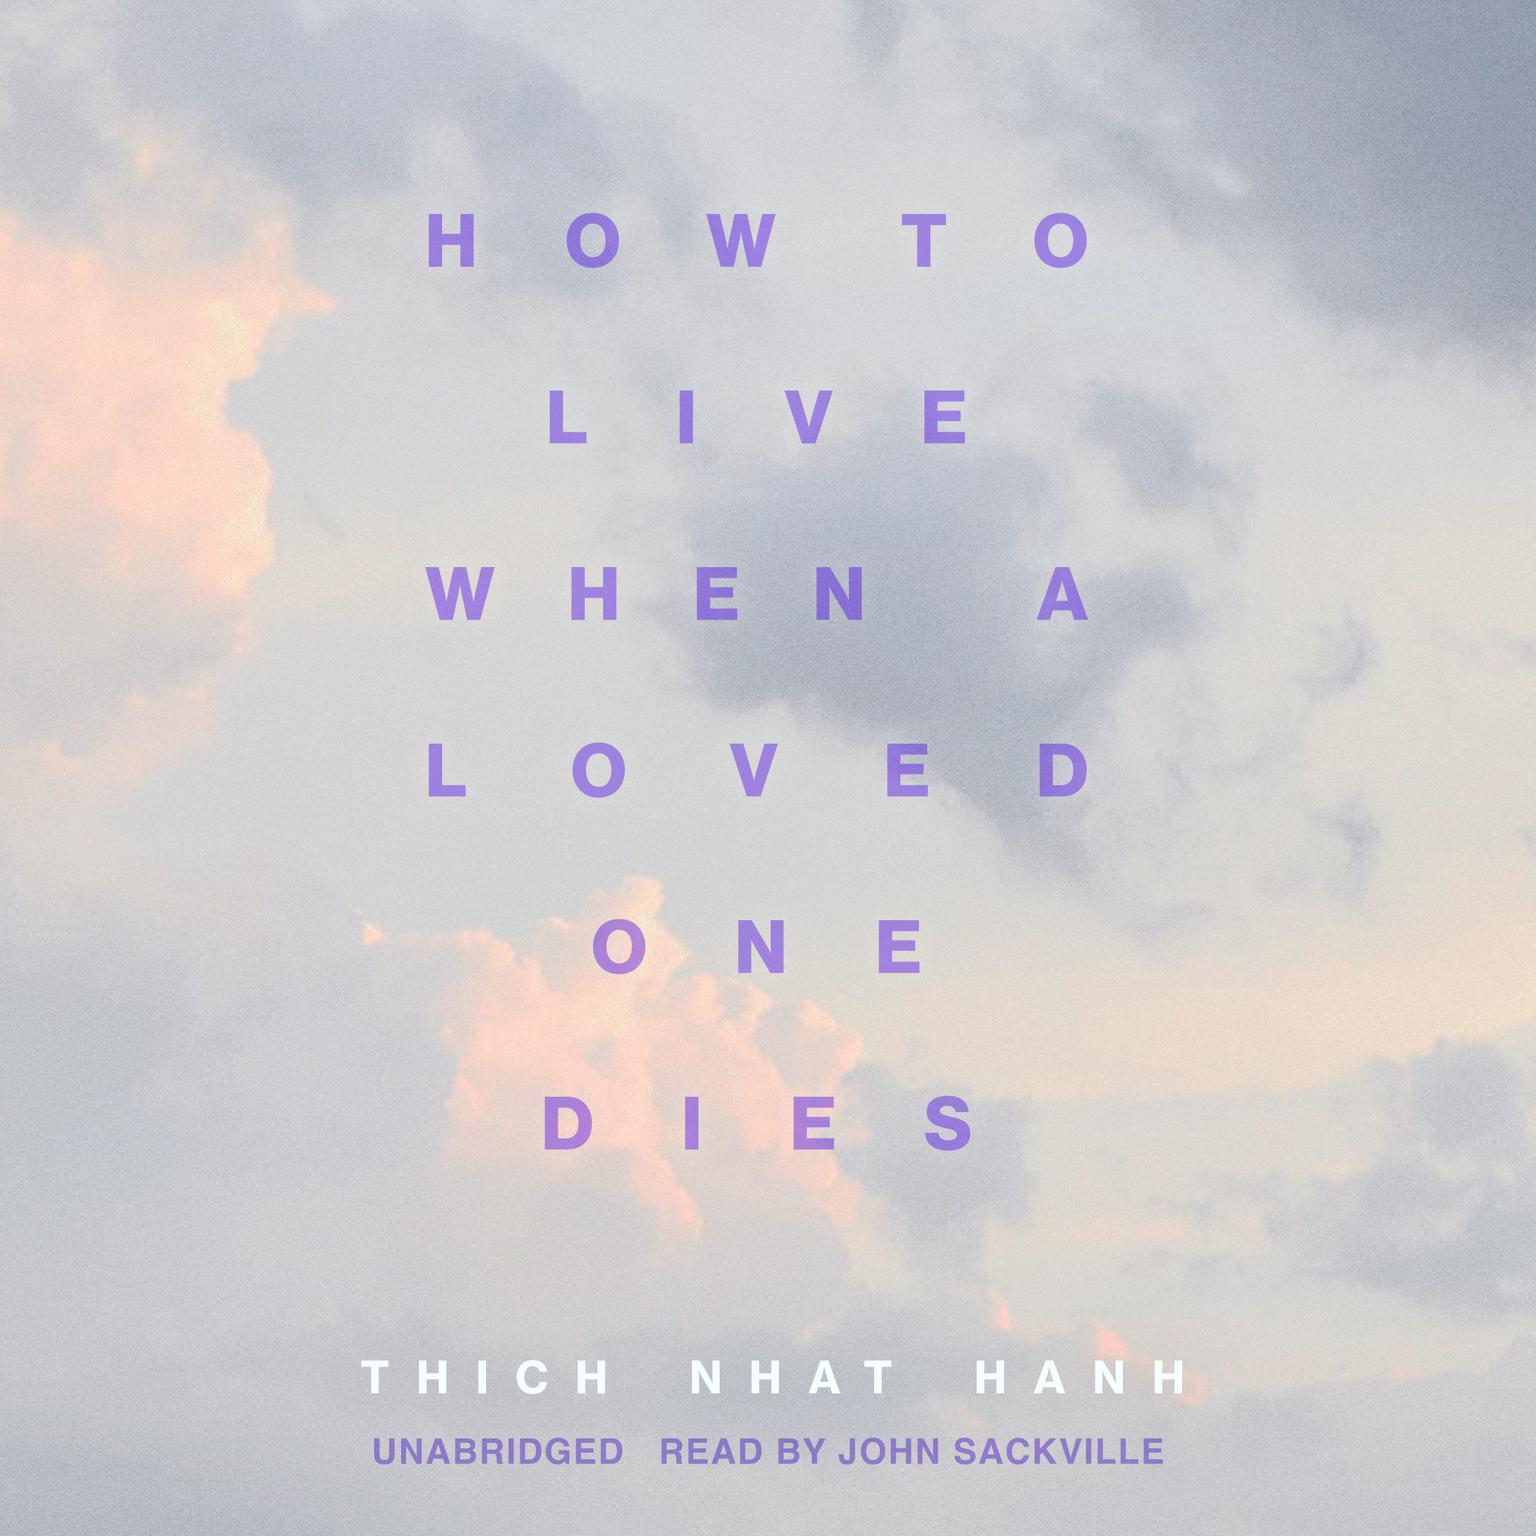 How to Live When a Loved One Dies: Healing Meditations for Grief and Loss Audiobook, by Thich Nhat Hanh